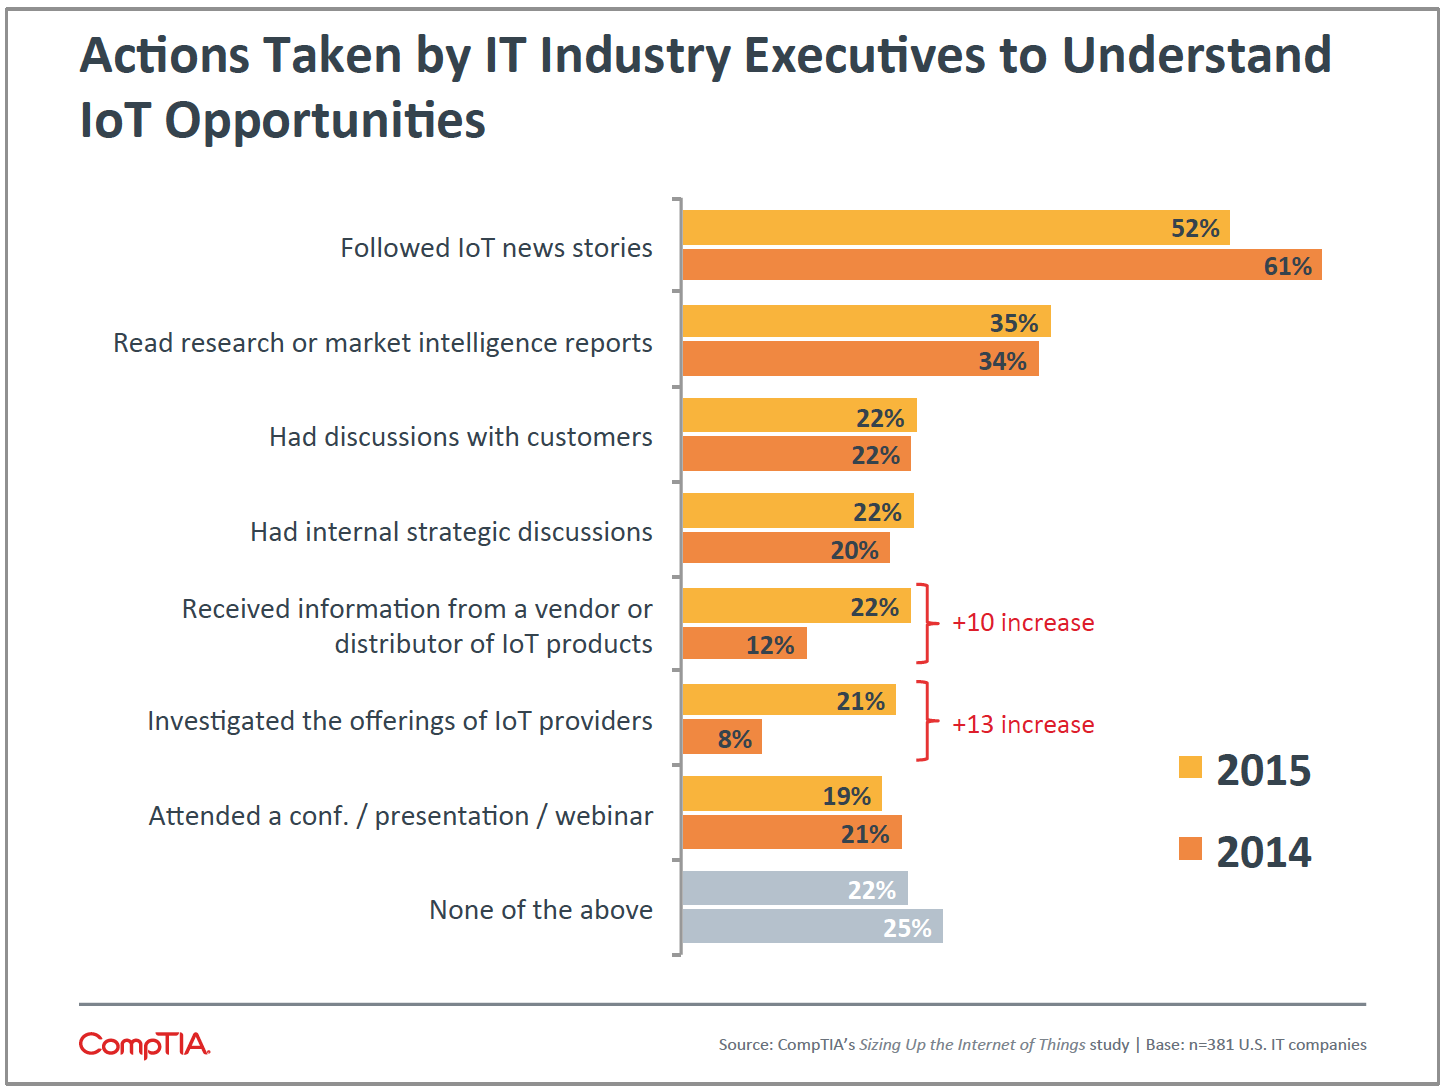 Actions Taken by IT Industry Executives to Understand IoT Opportunities